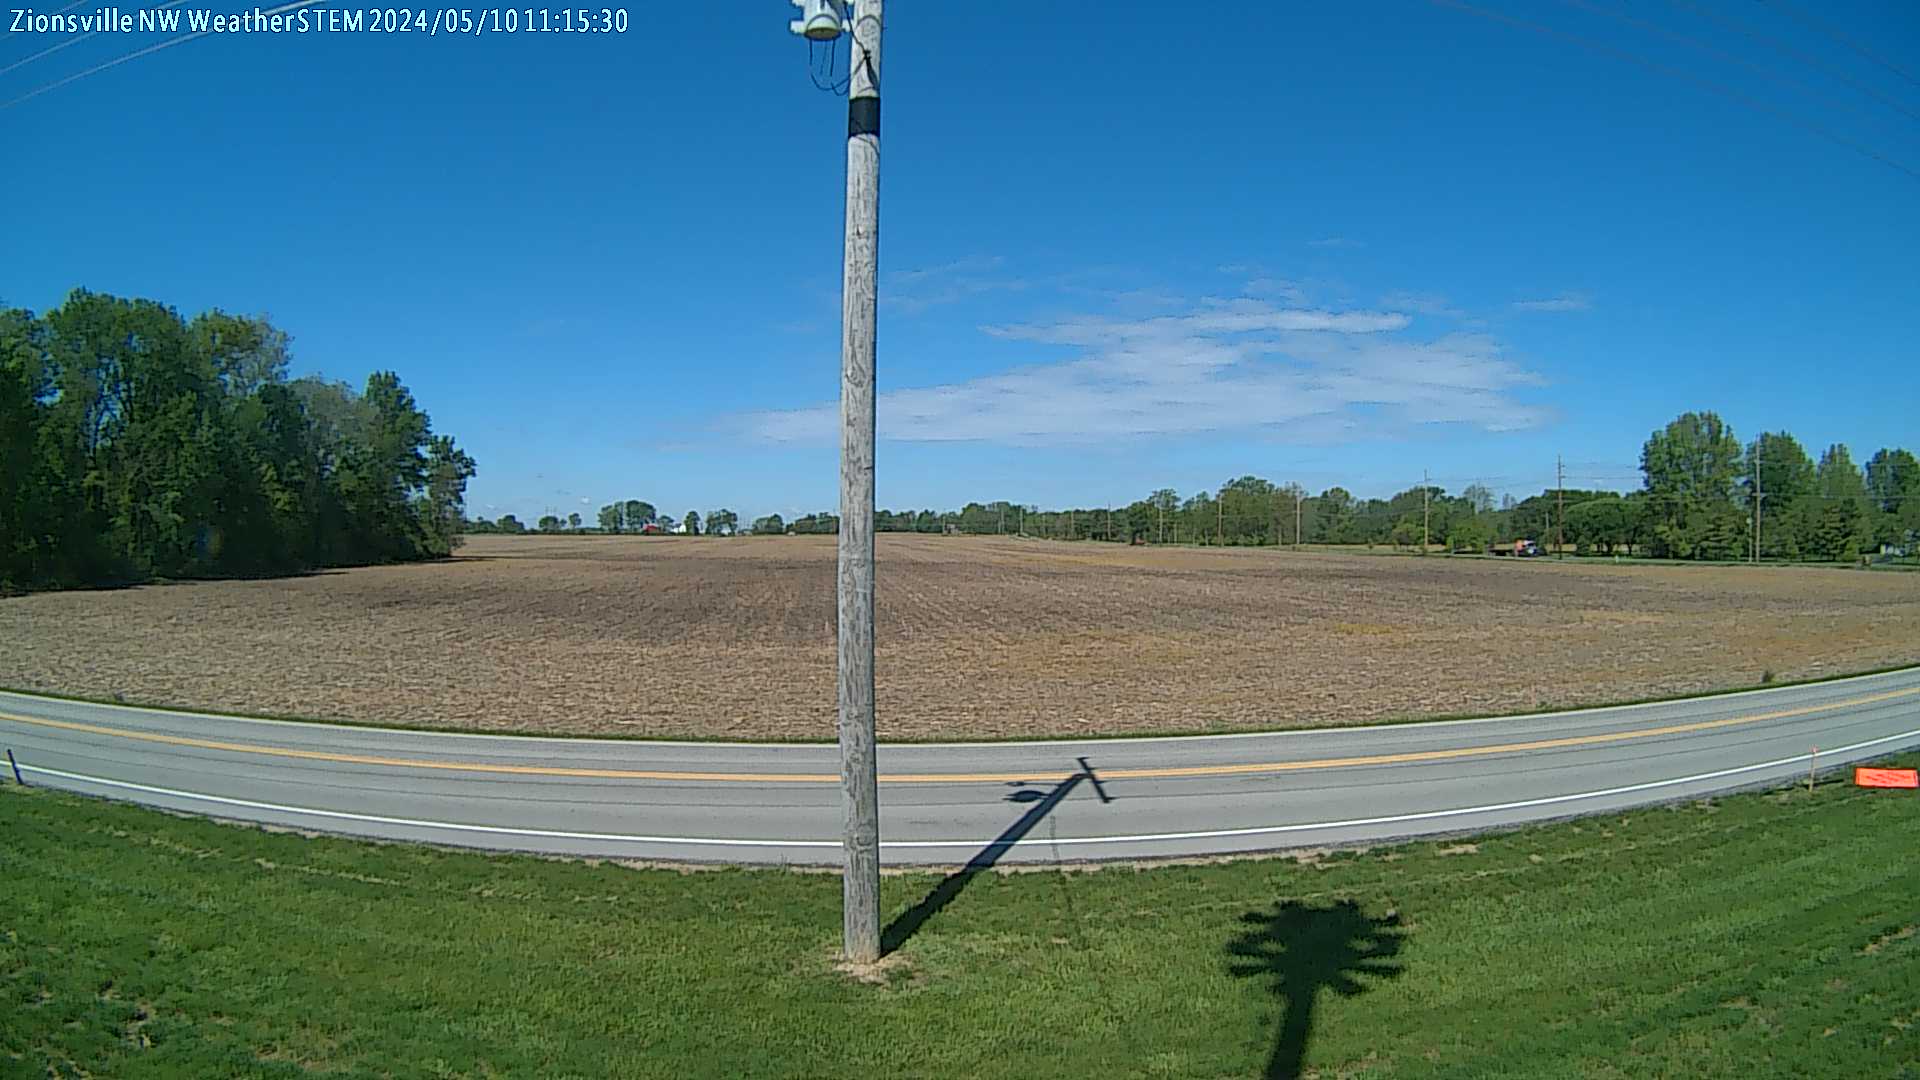 WeatherSTEM Cloud Camera null in Boone County, Indiana IN at Zionsville Northwest